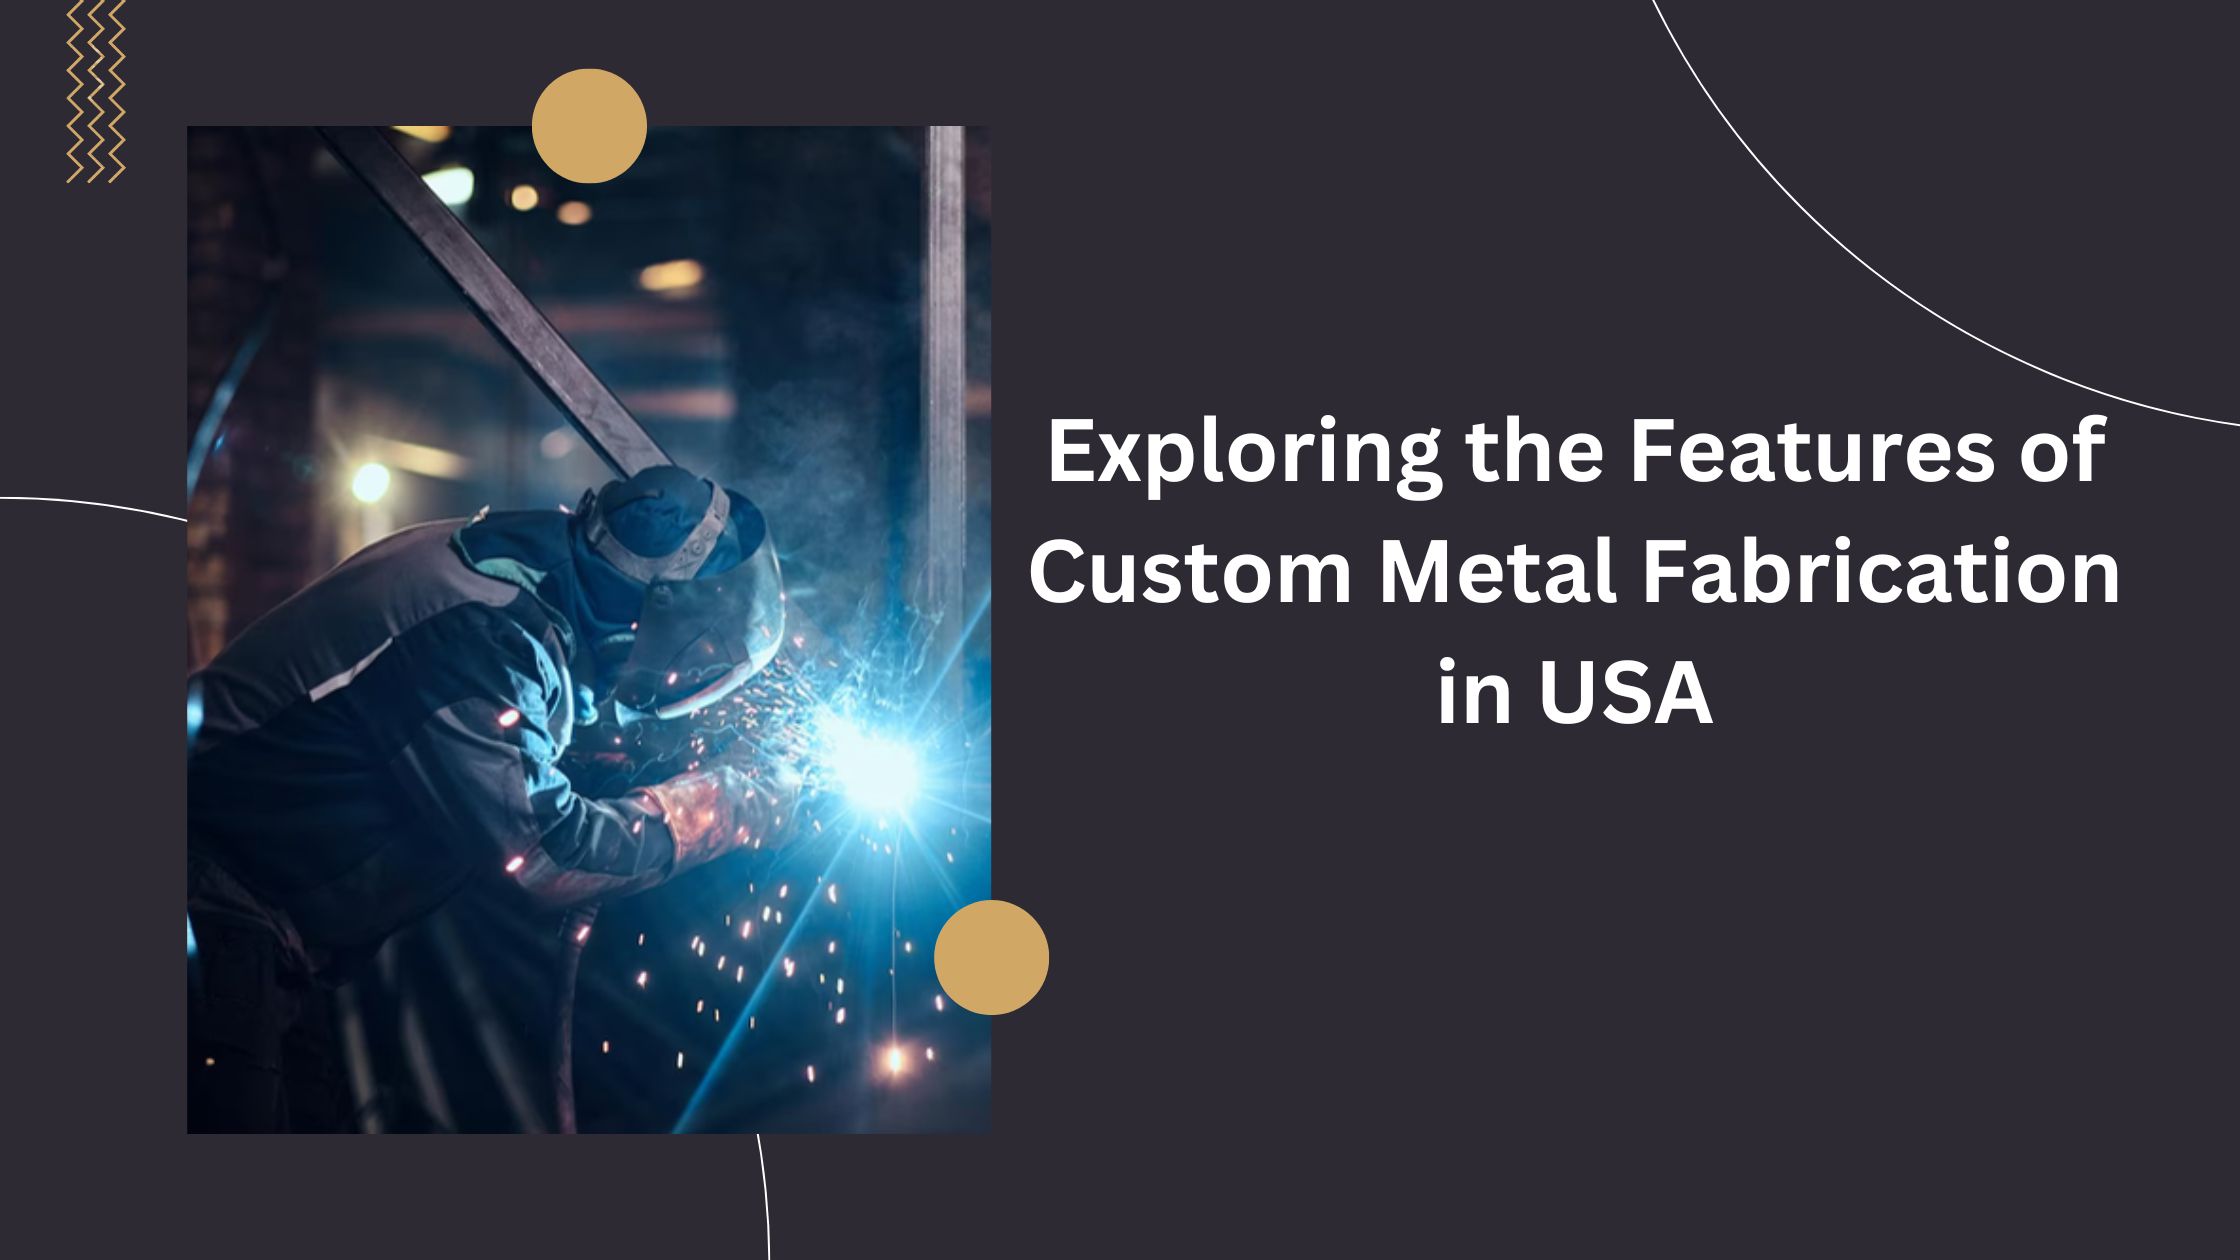 EXPLORING THE FEATURES OF CUSTOM METAL FABRICATION IN USA